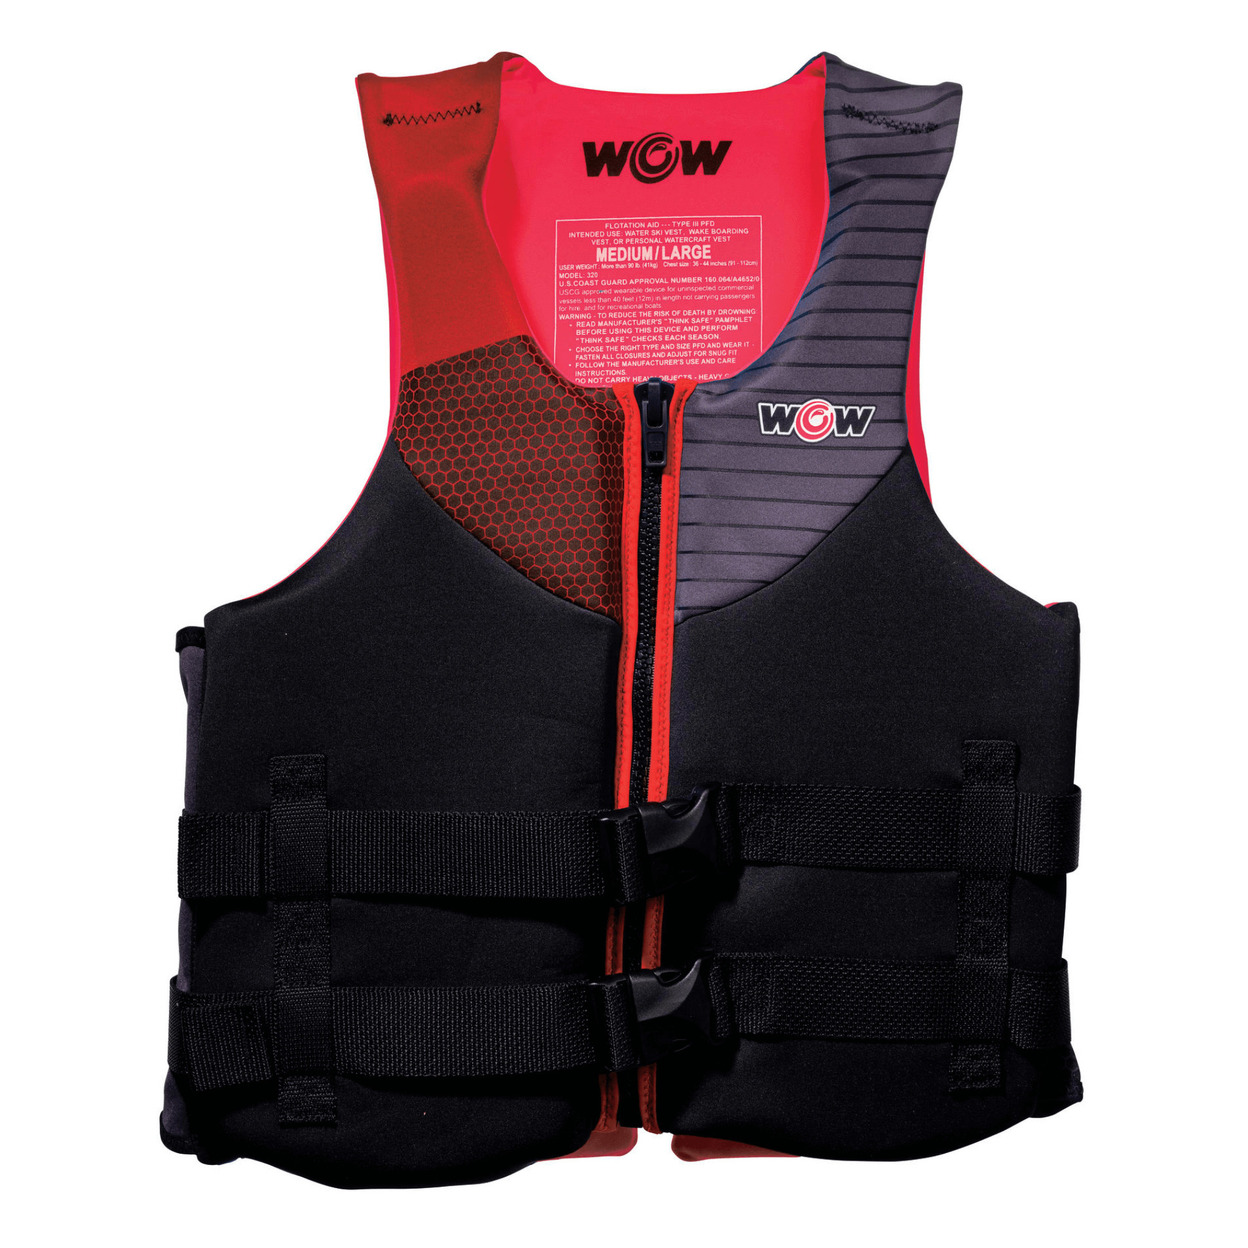 WOW Sports Feel Good Dual Sized Evoprene PFD Personal Floatation Device For Adults - Red, Medium / Large